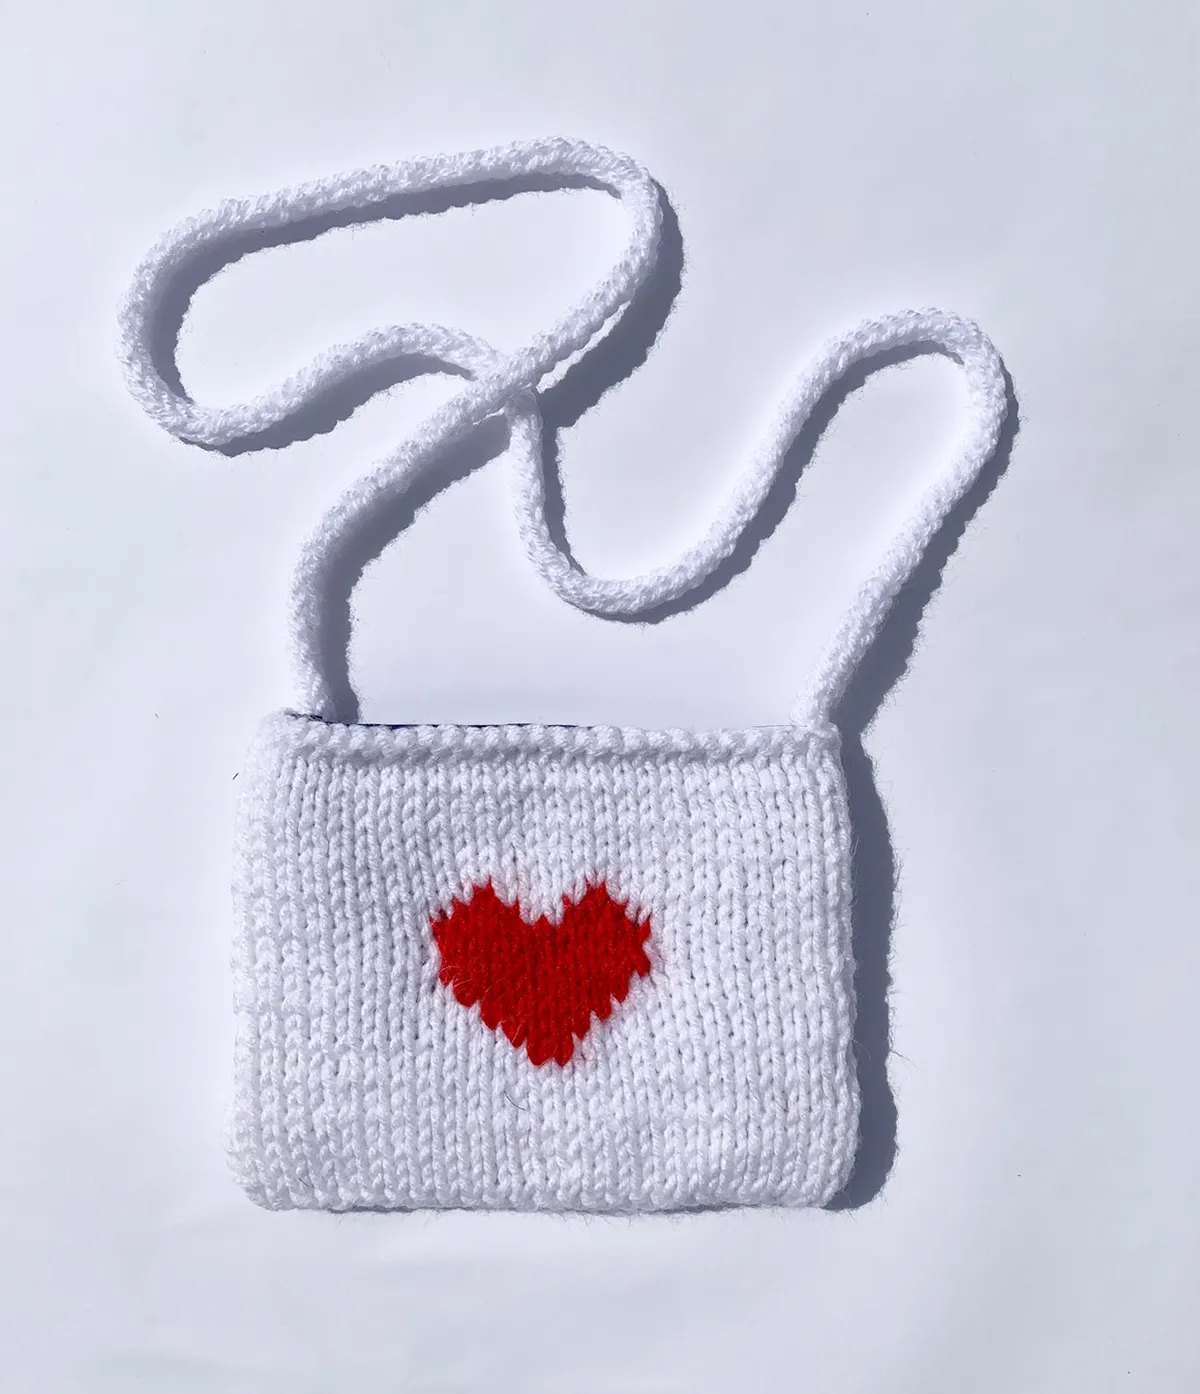 Heart bag knitting pattern Knitted pouch pattern